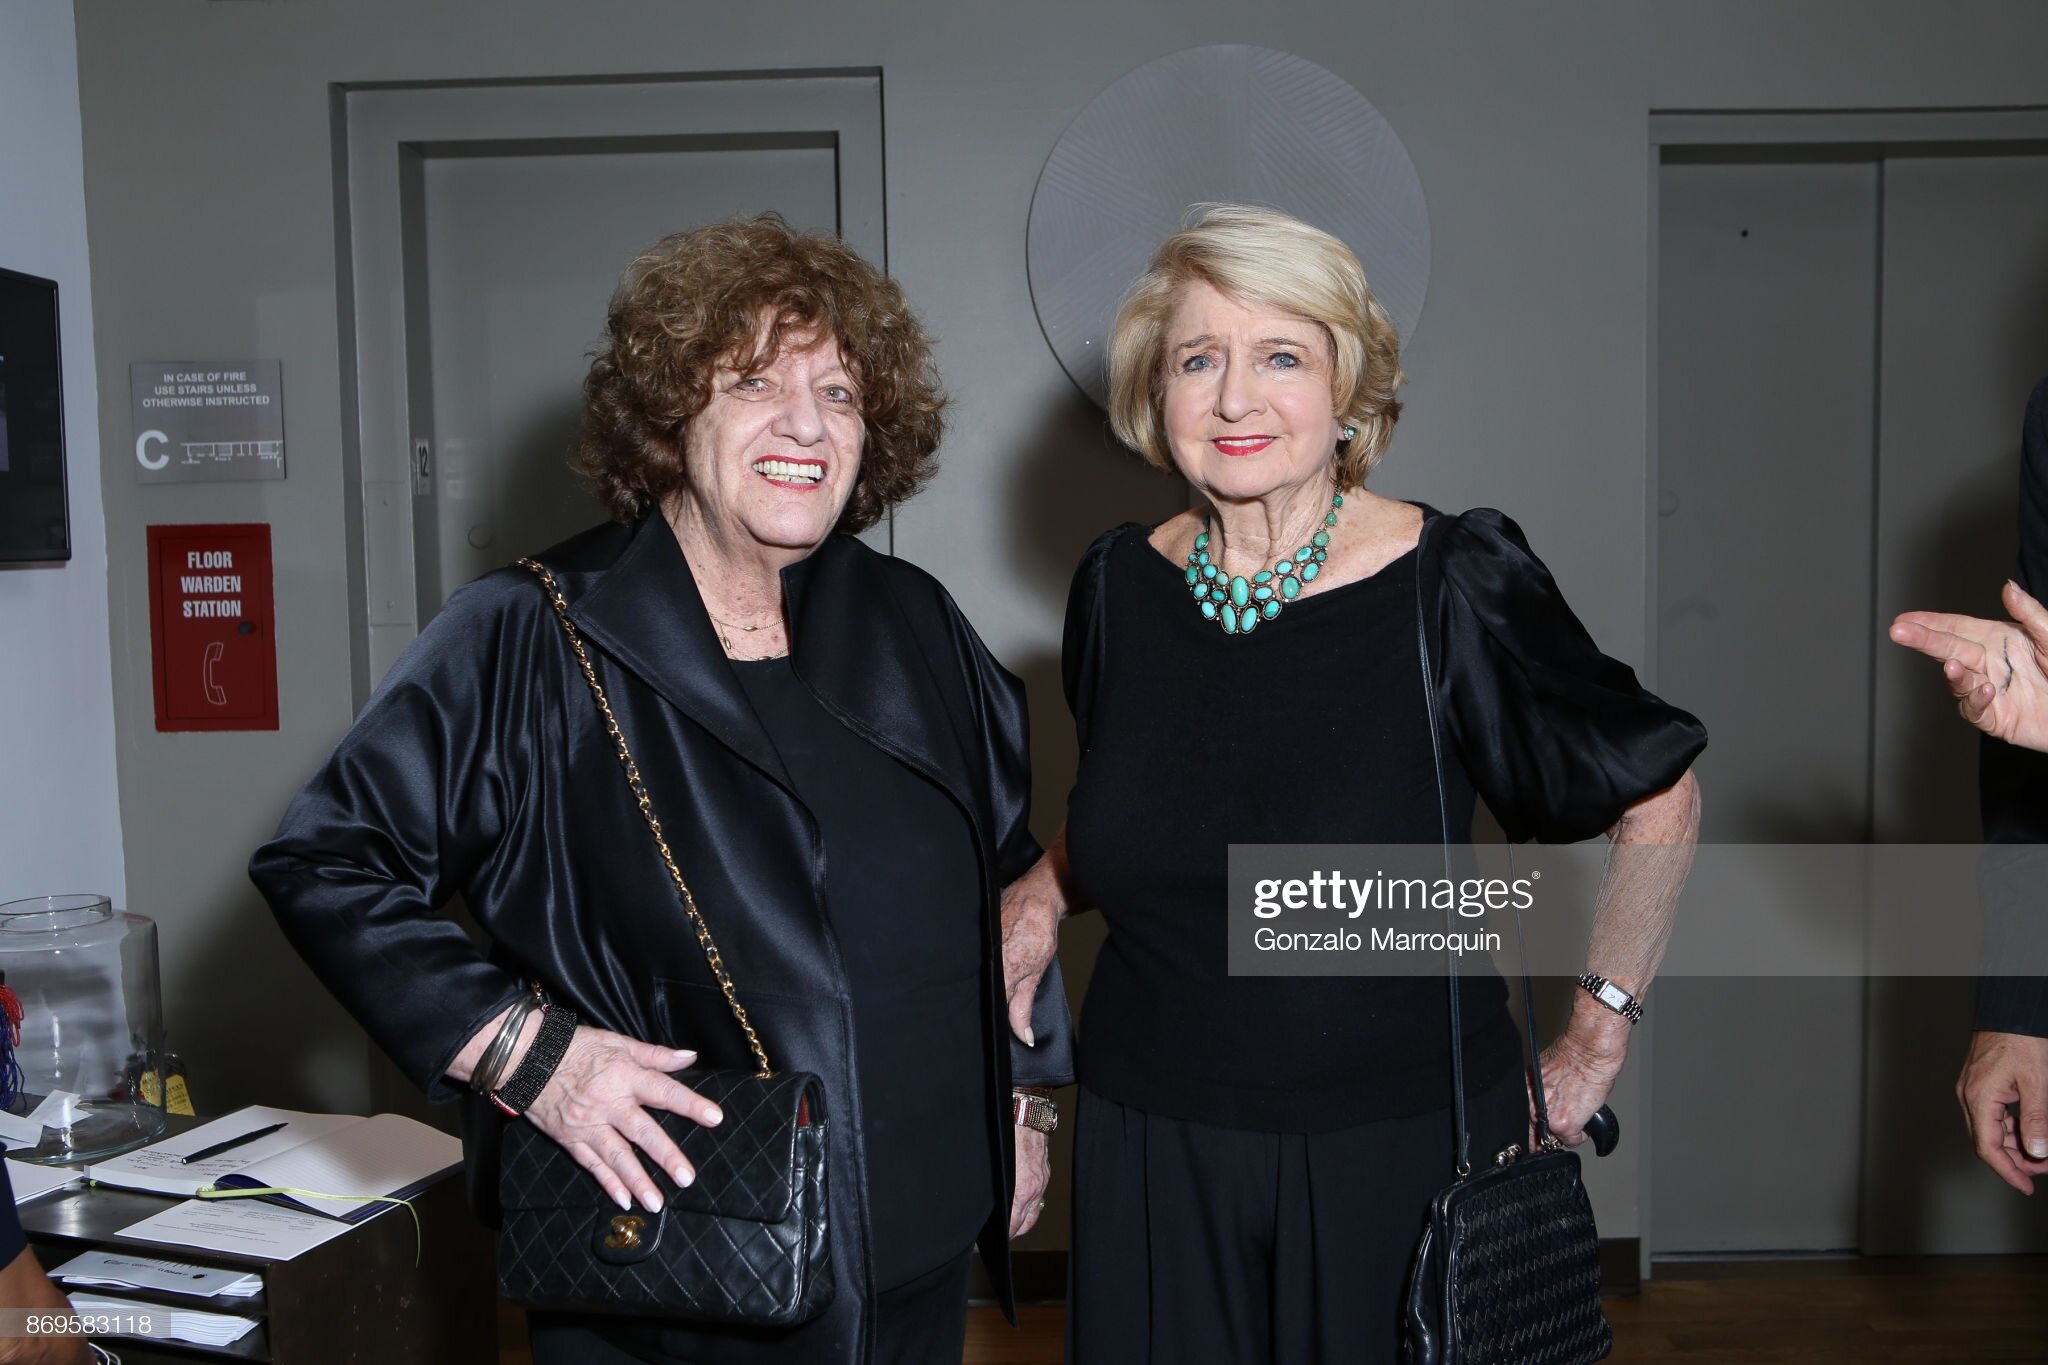  Ellen Sweeney and Shirley Lord Rosenthal during the Clodagh Design Hosts The Thorn Tree Project's Evening of Art on November 2, 2017.